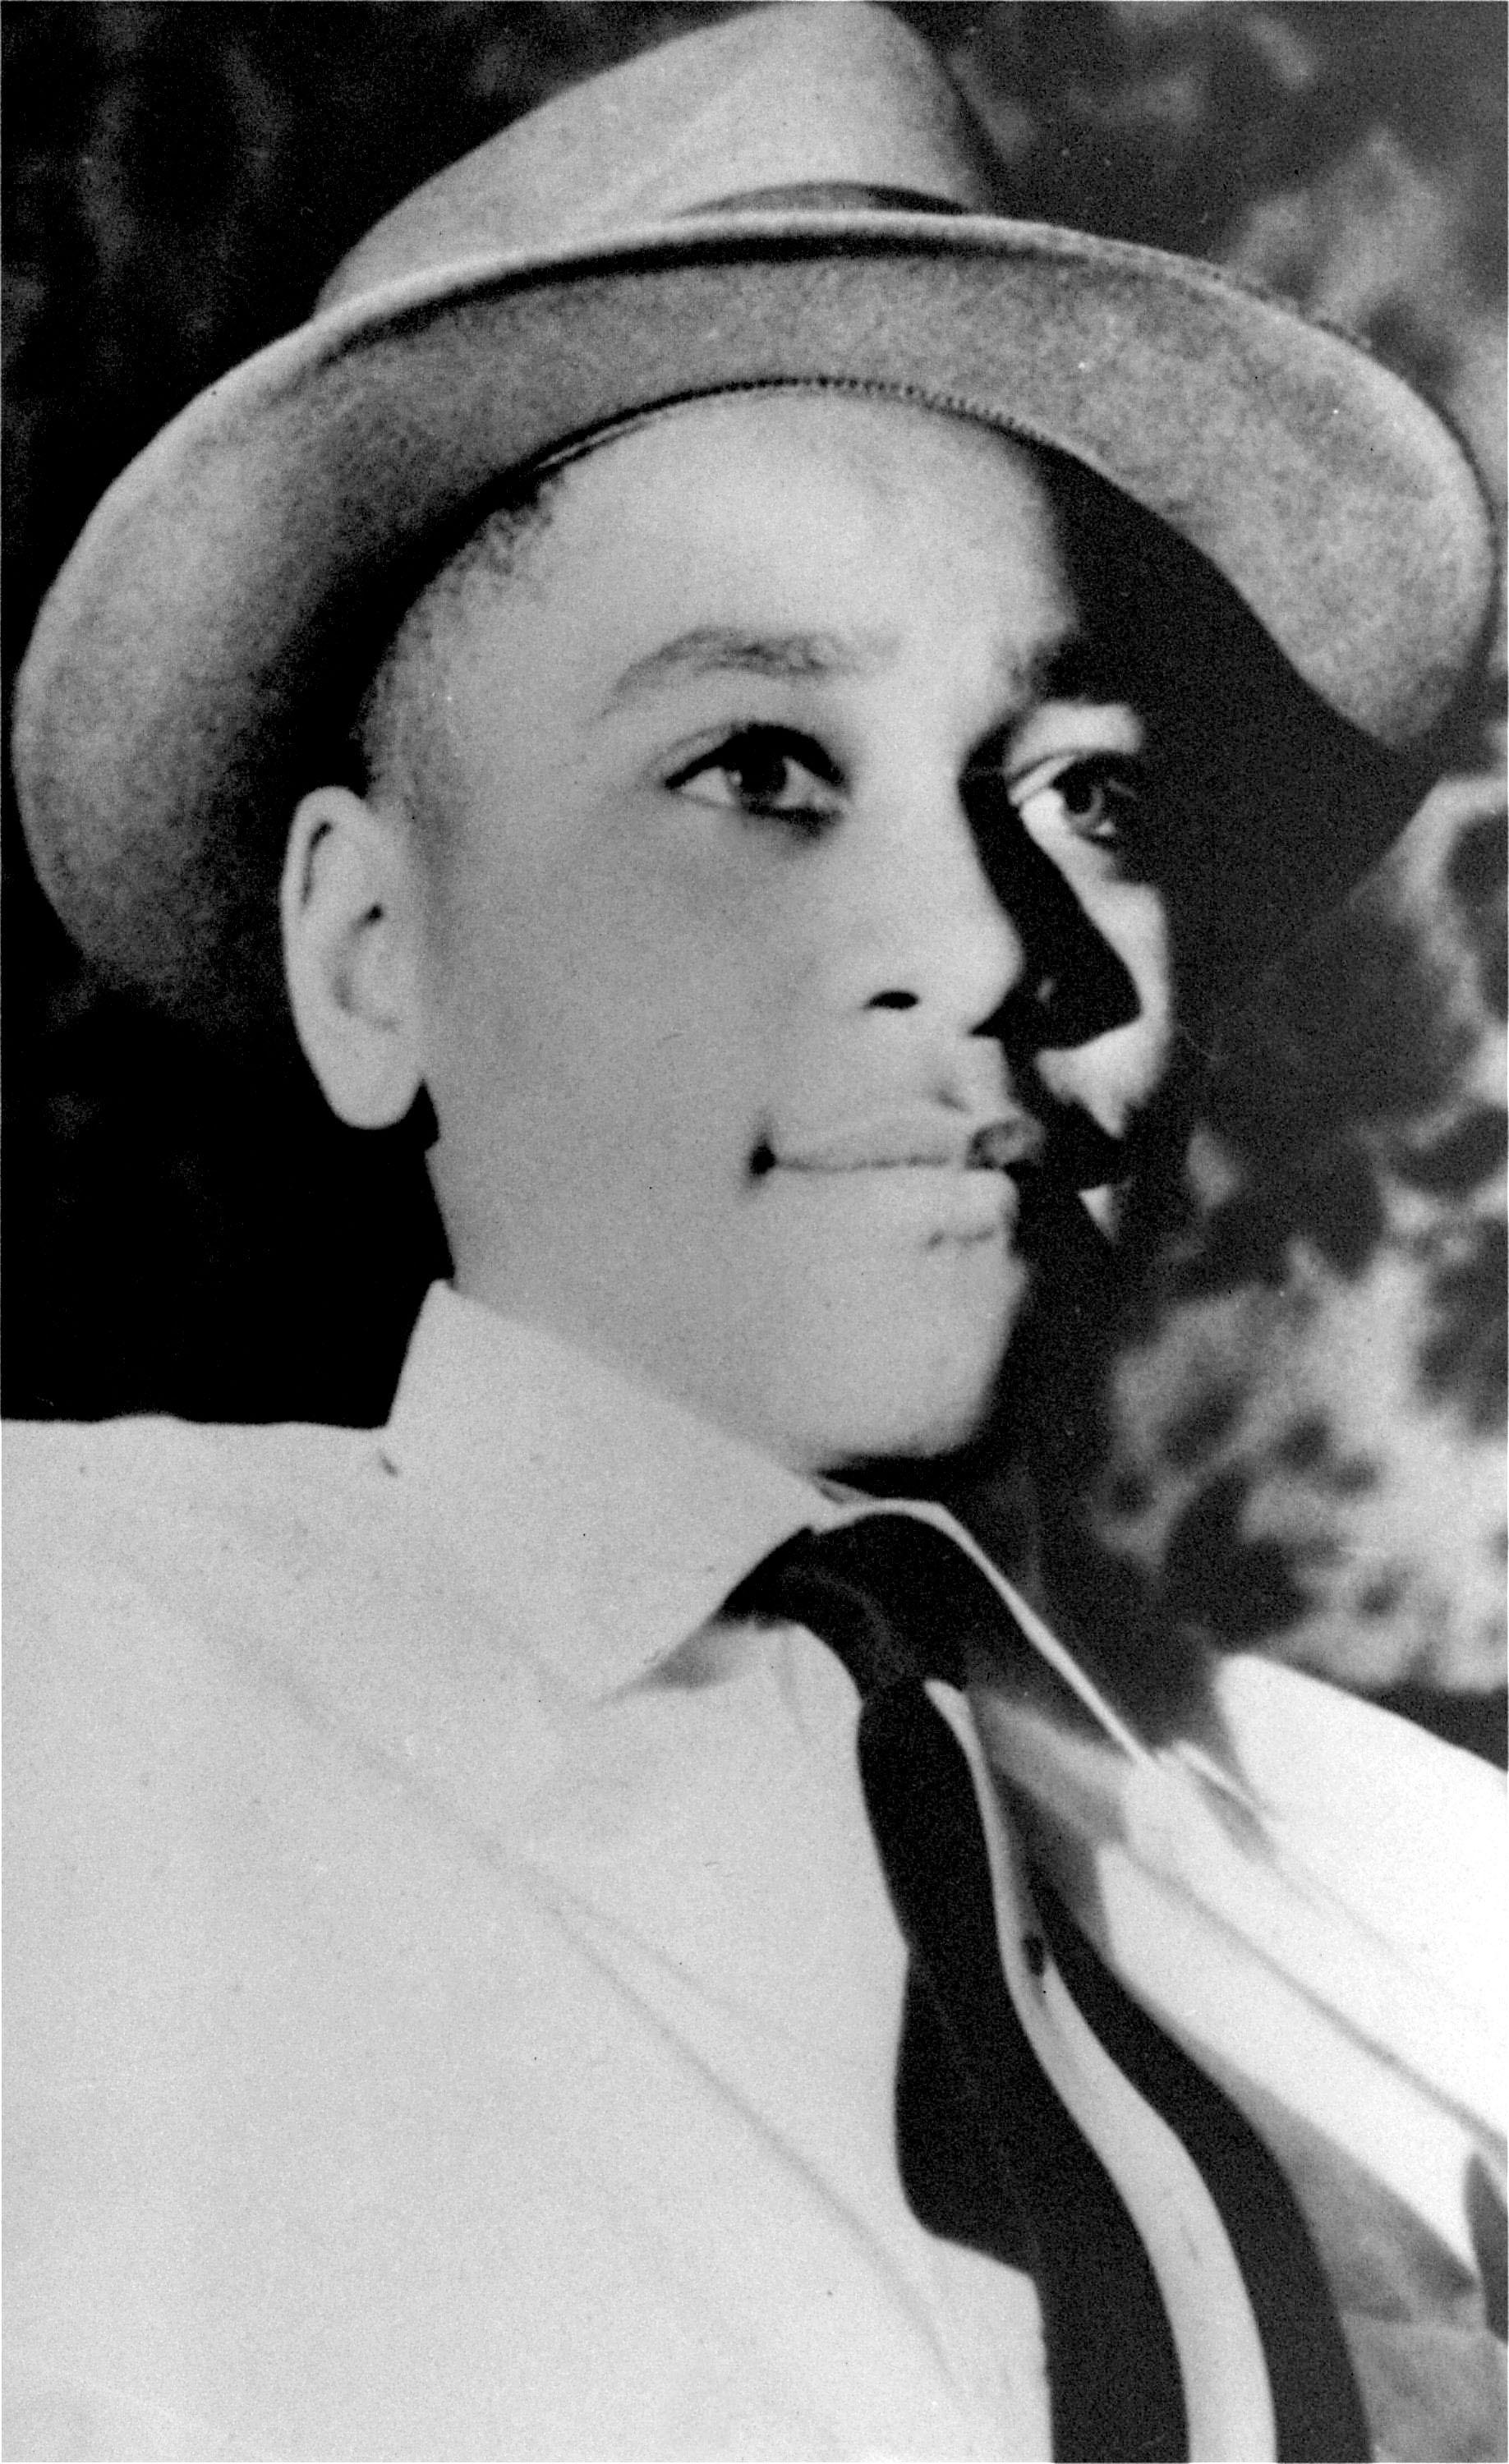 JACKSON, Miss. (AP) — A team searching a Mississippi courthouse basement for evidence about the lynching of Black teenager Emmett Till has found the